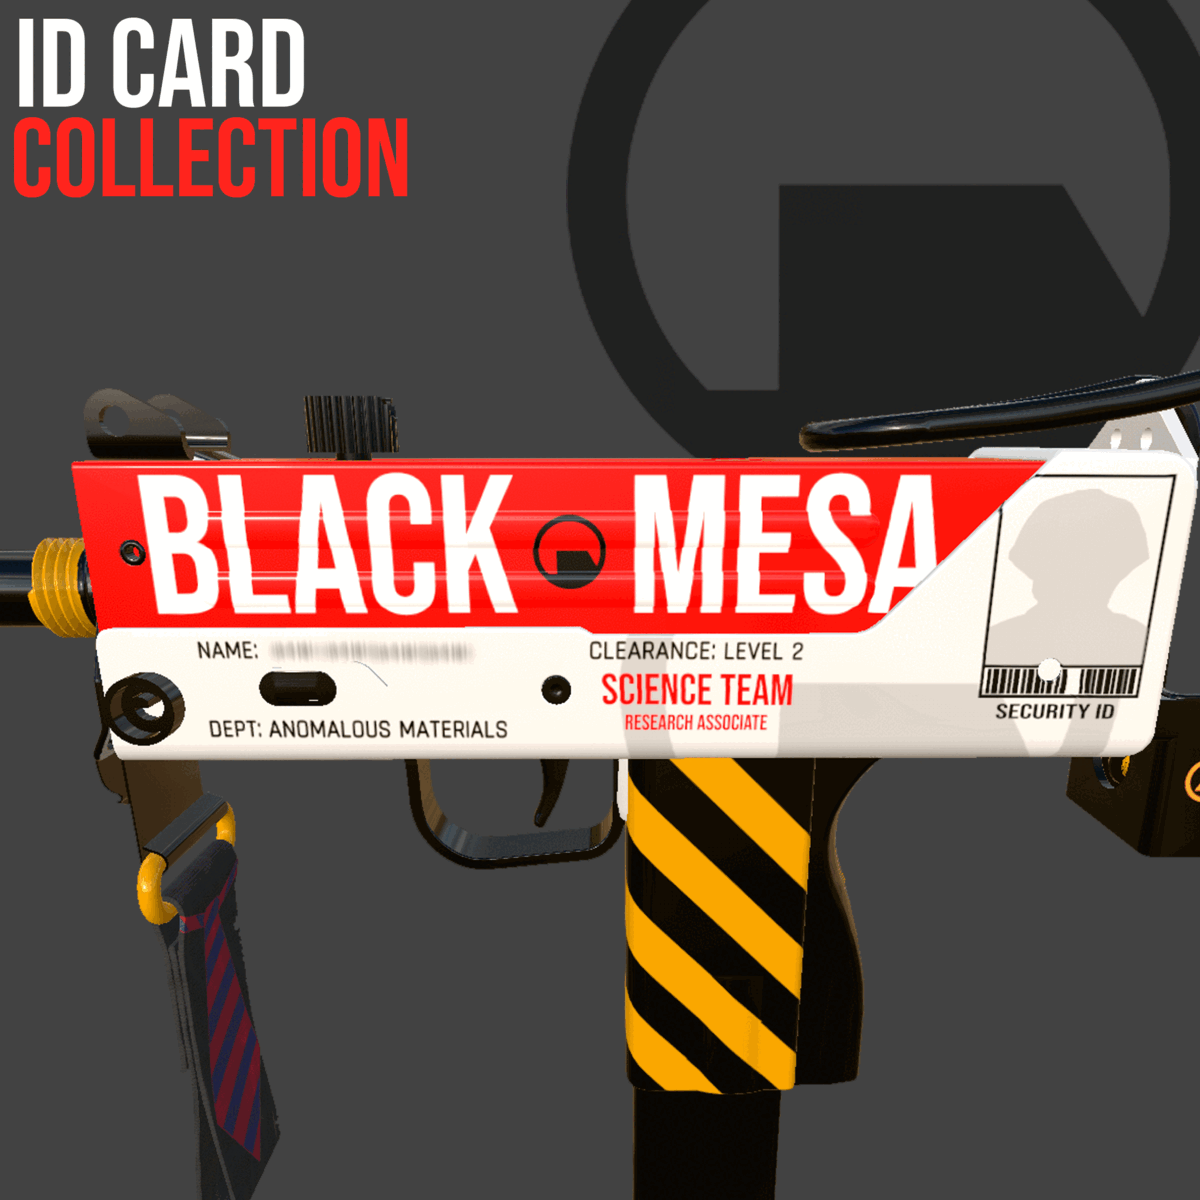 Last month me and some friends had the idea to make a Skin based on the Black Mesa ID Card and I forgot to post here

I would appreciate it if you guys could like the submission on the workshop

https://steamcommunity.com/workshop/filedetails/?id=3045053238

Thanks!!